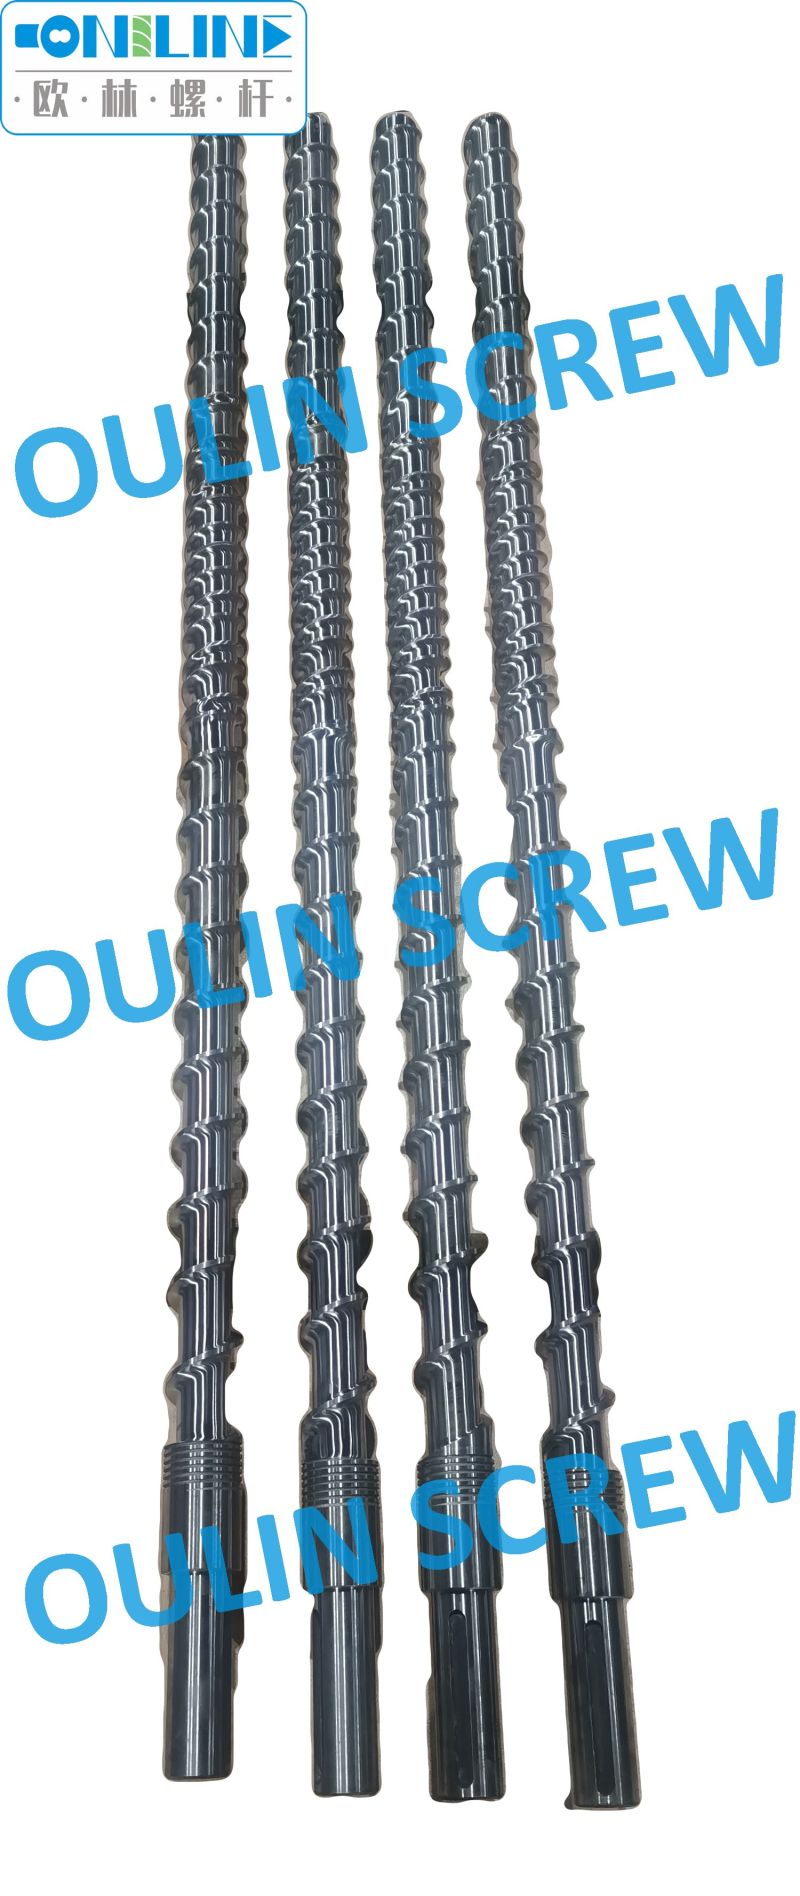 Jwell Extrusion Screw and Barrel for Rigid PVC Profiles